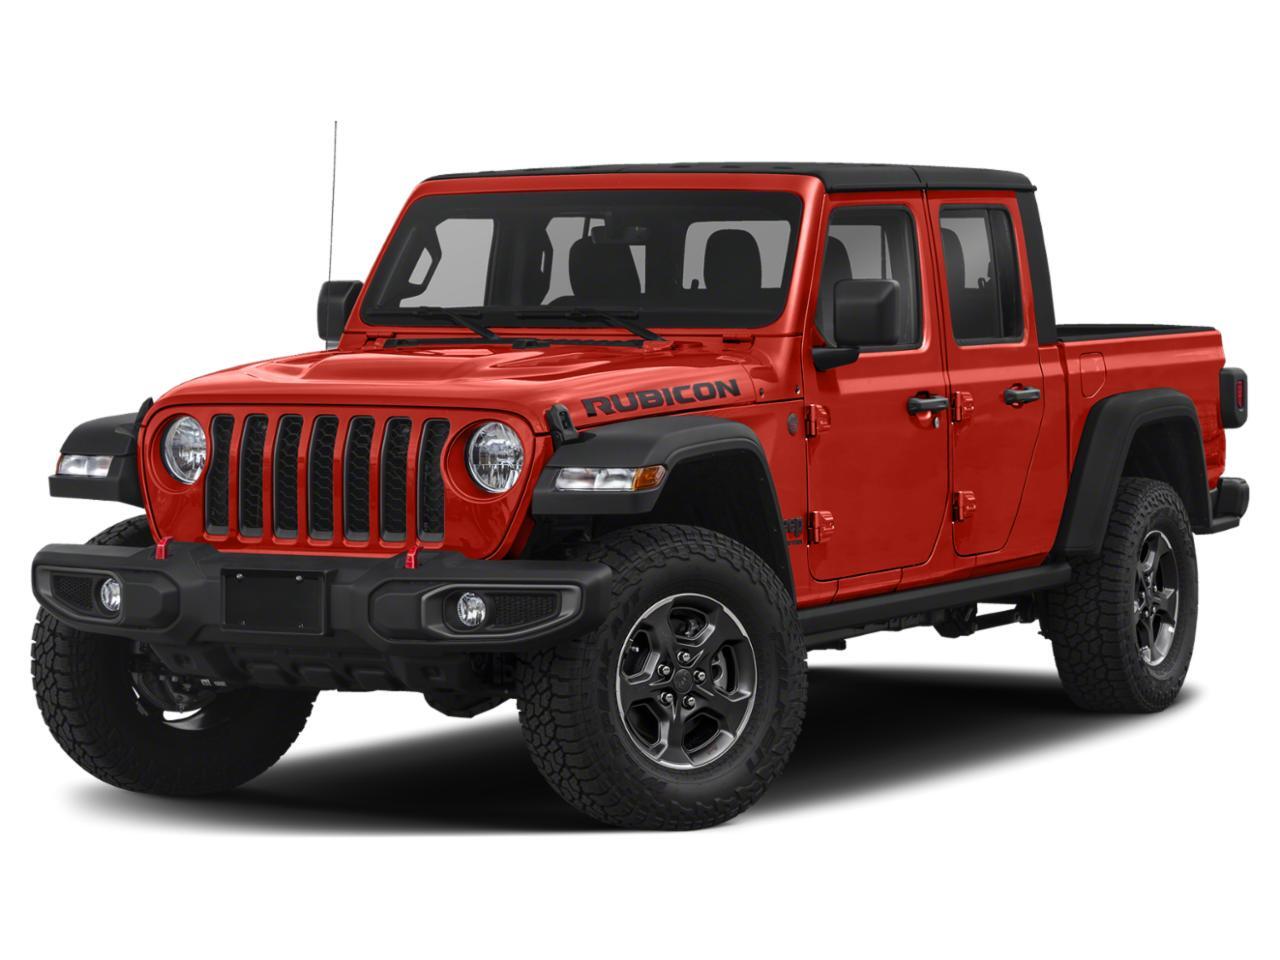 2020 Jeep Gladiator RUBICON IN FIRECRACKER RED EQUIPPED WITH A 3.6L V6